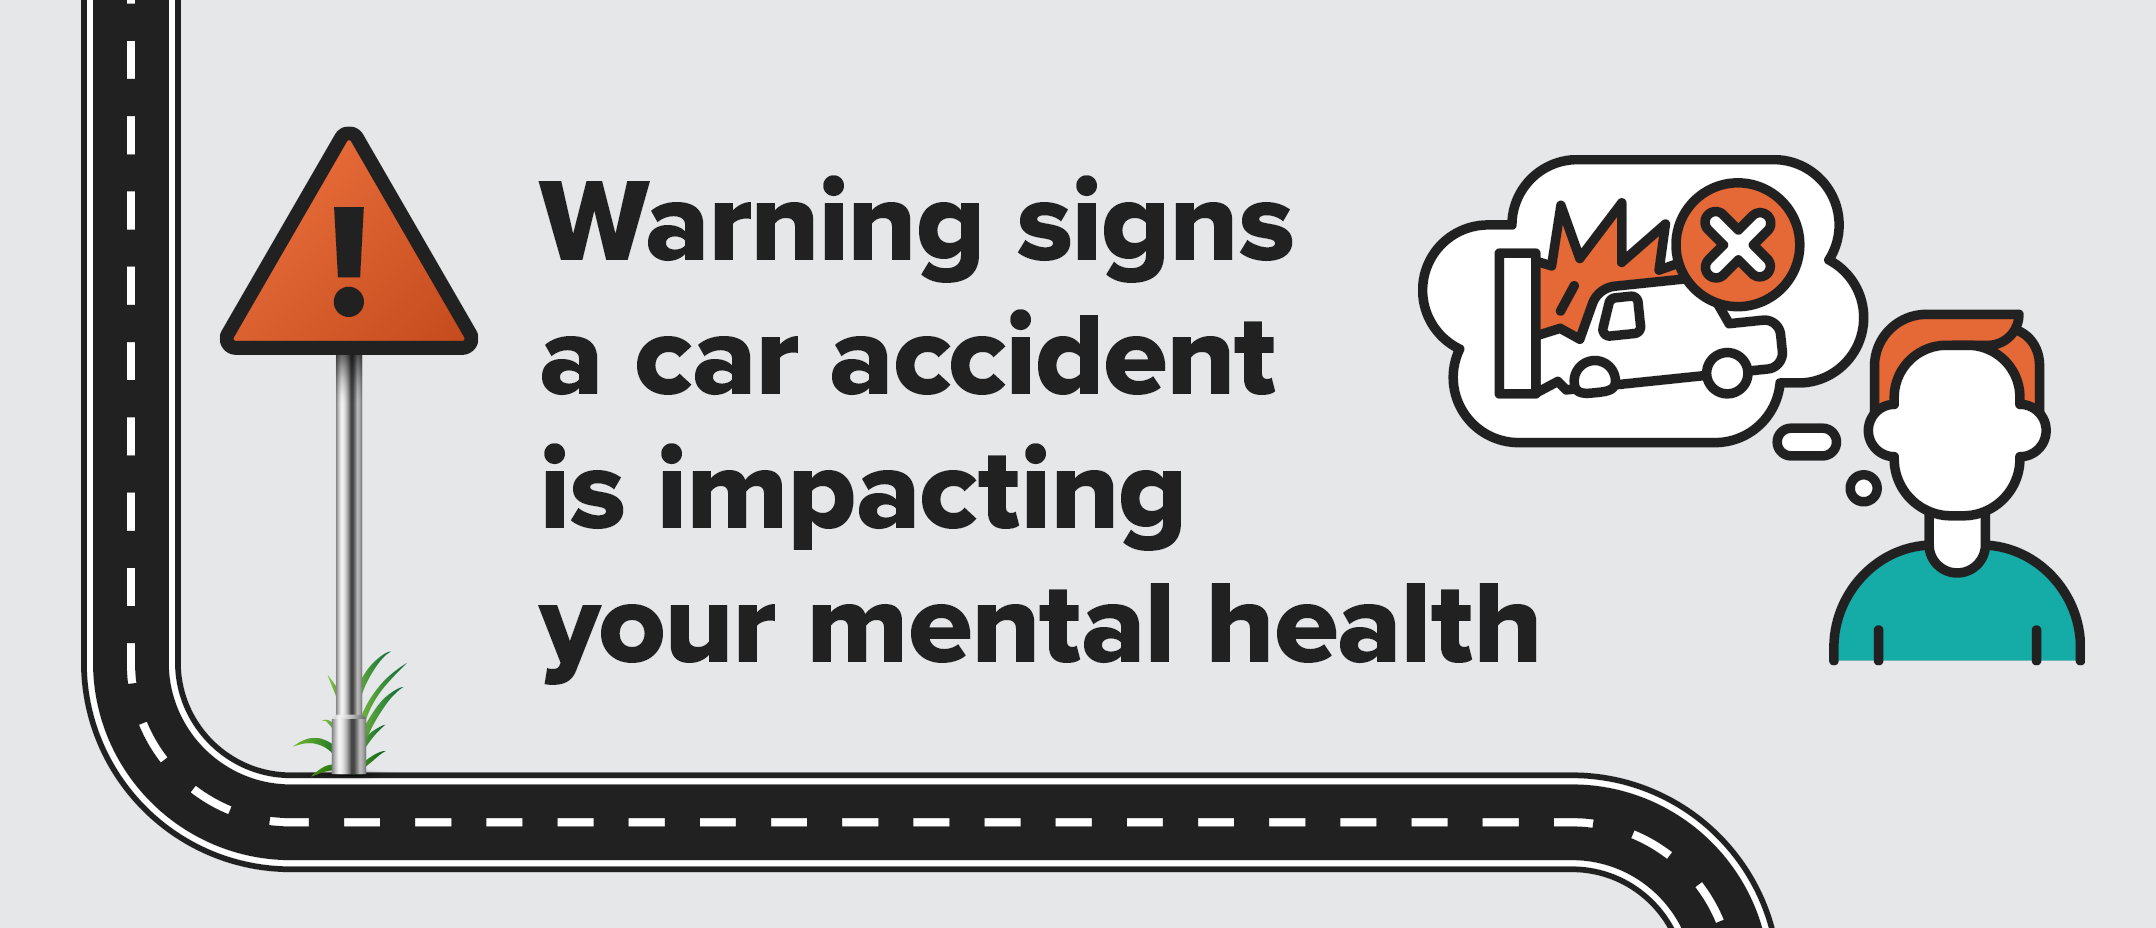 Warning signs a car accident is impacting your mental health infographic